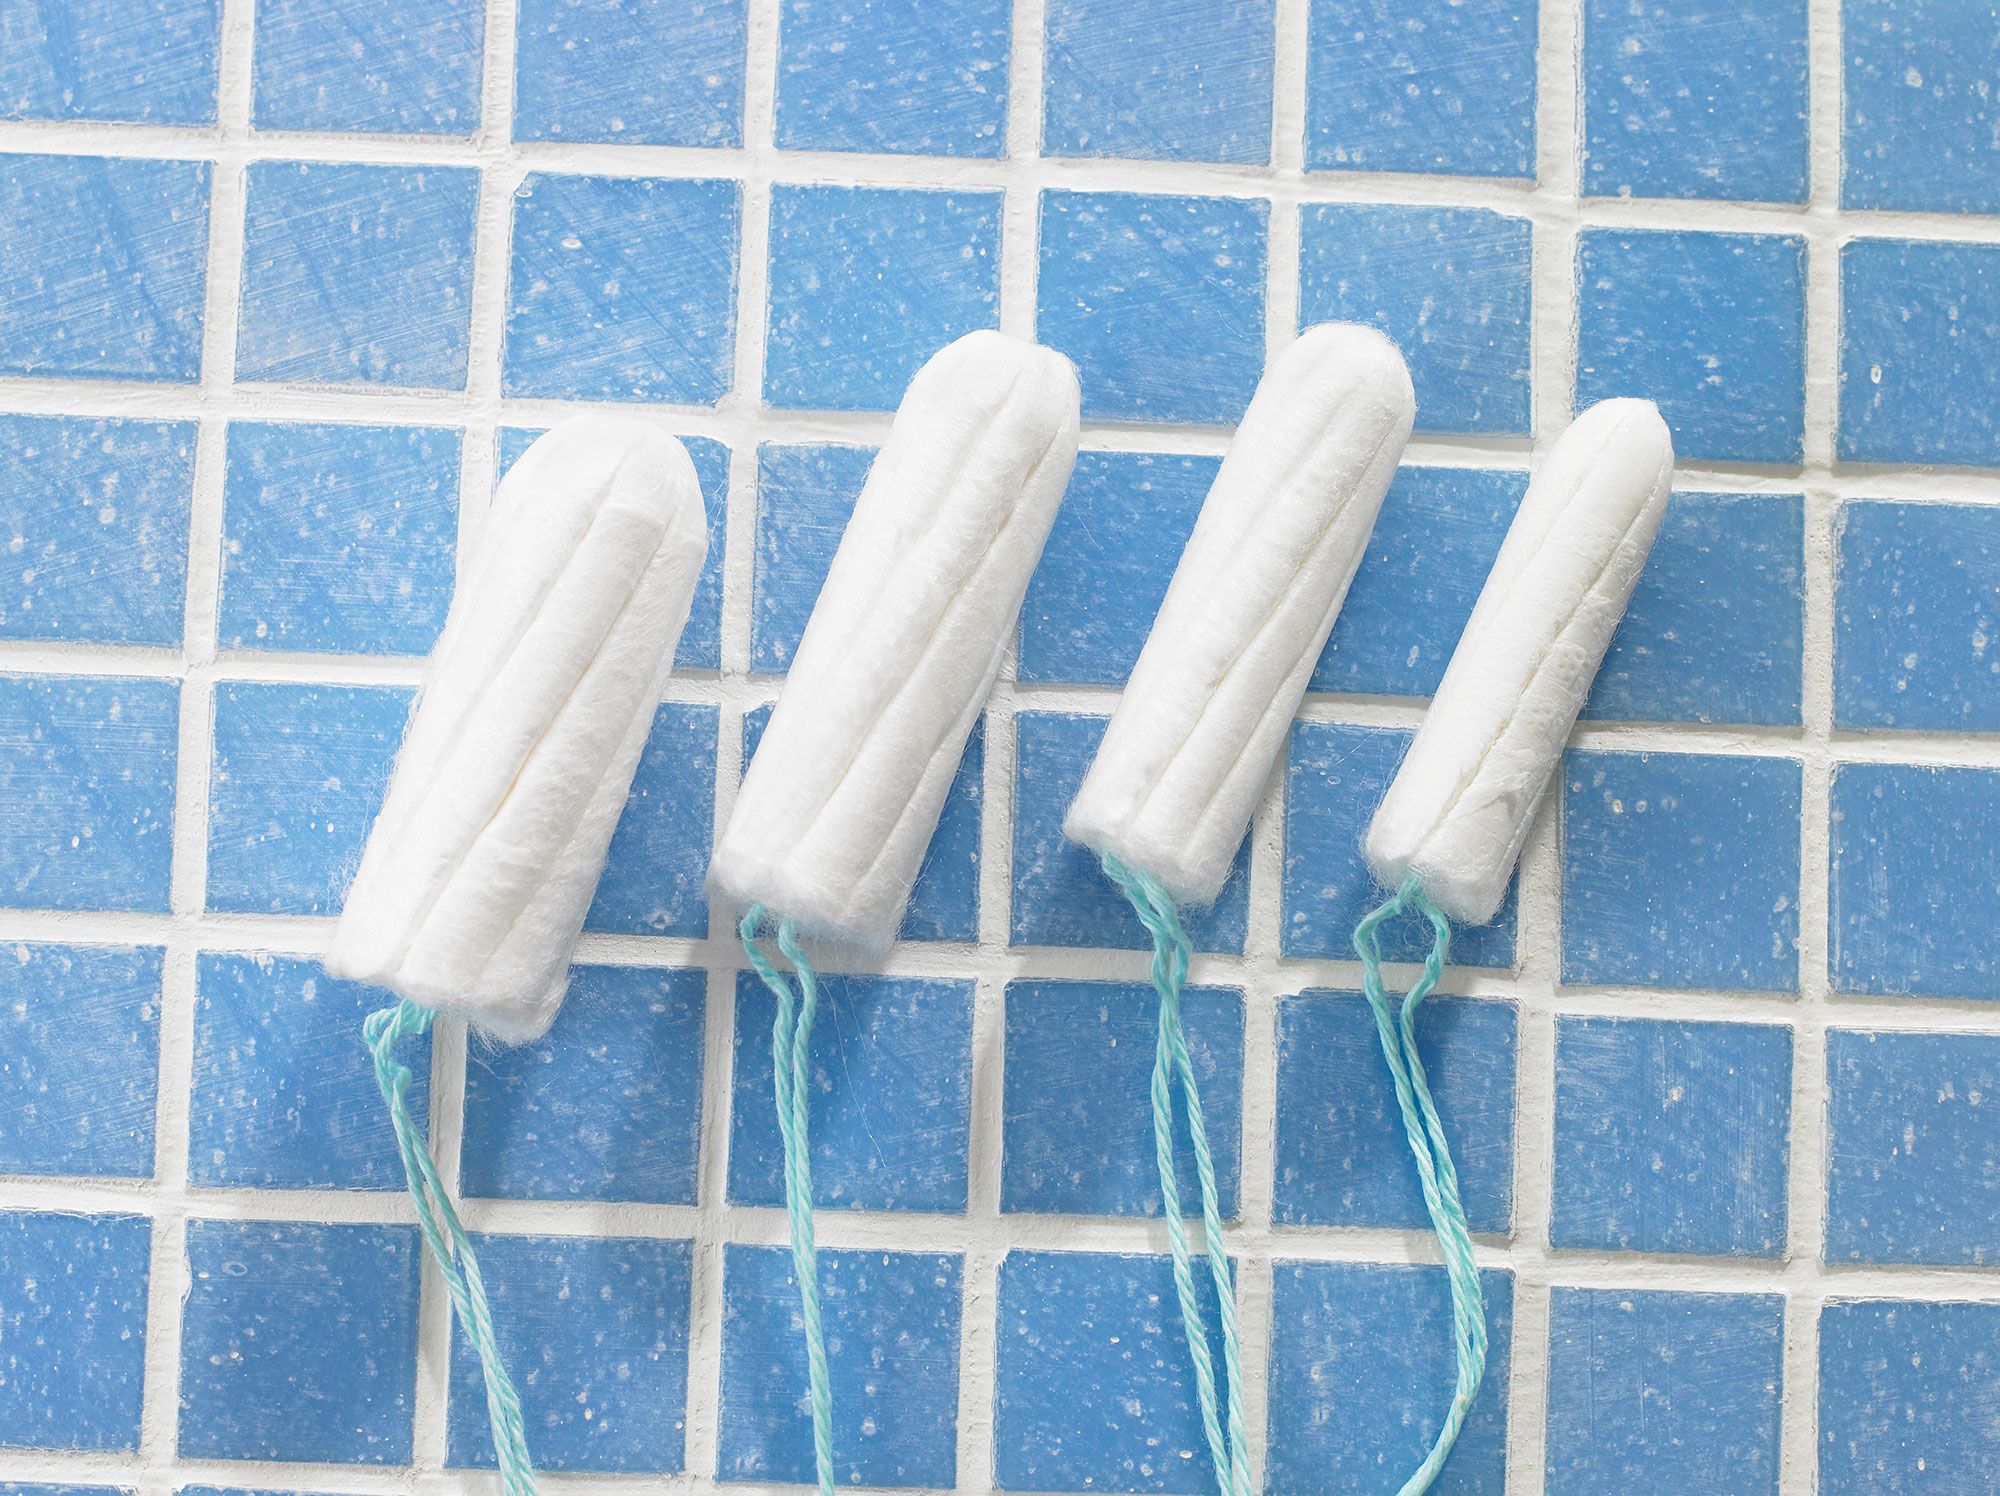 14 Tampon Horror Stories - Embarrassing Period Stories